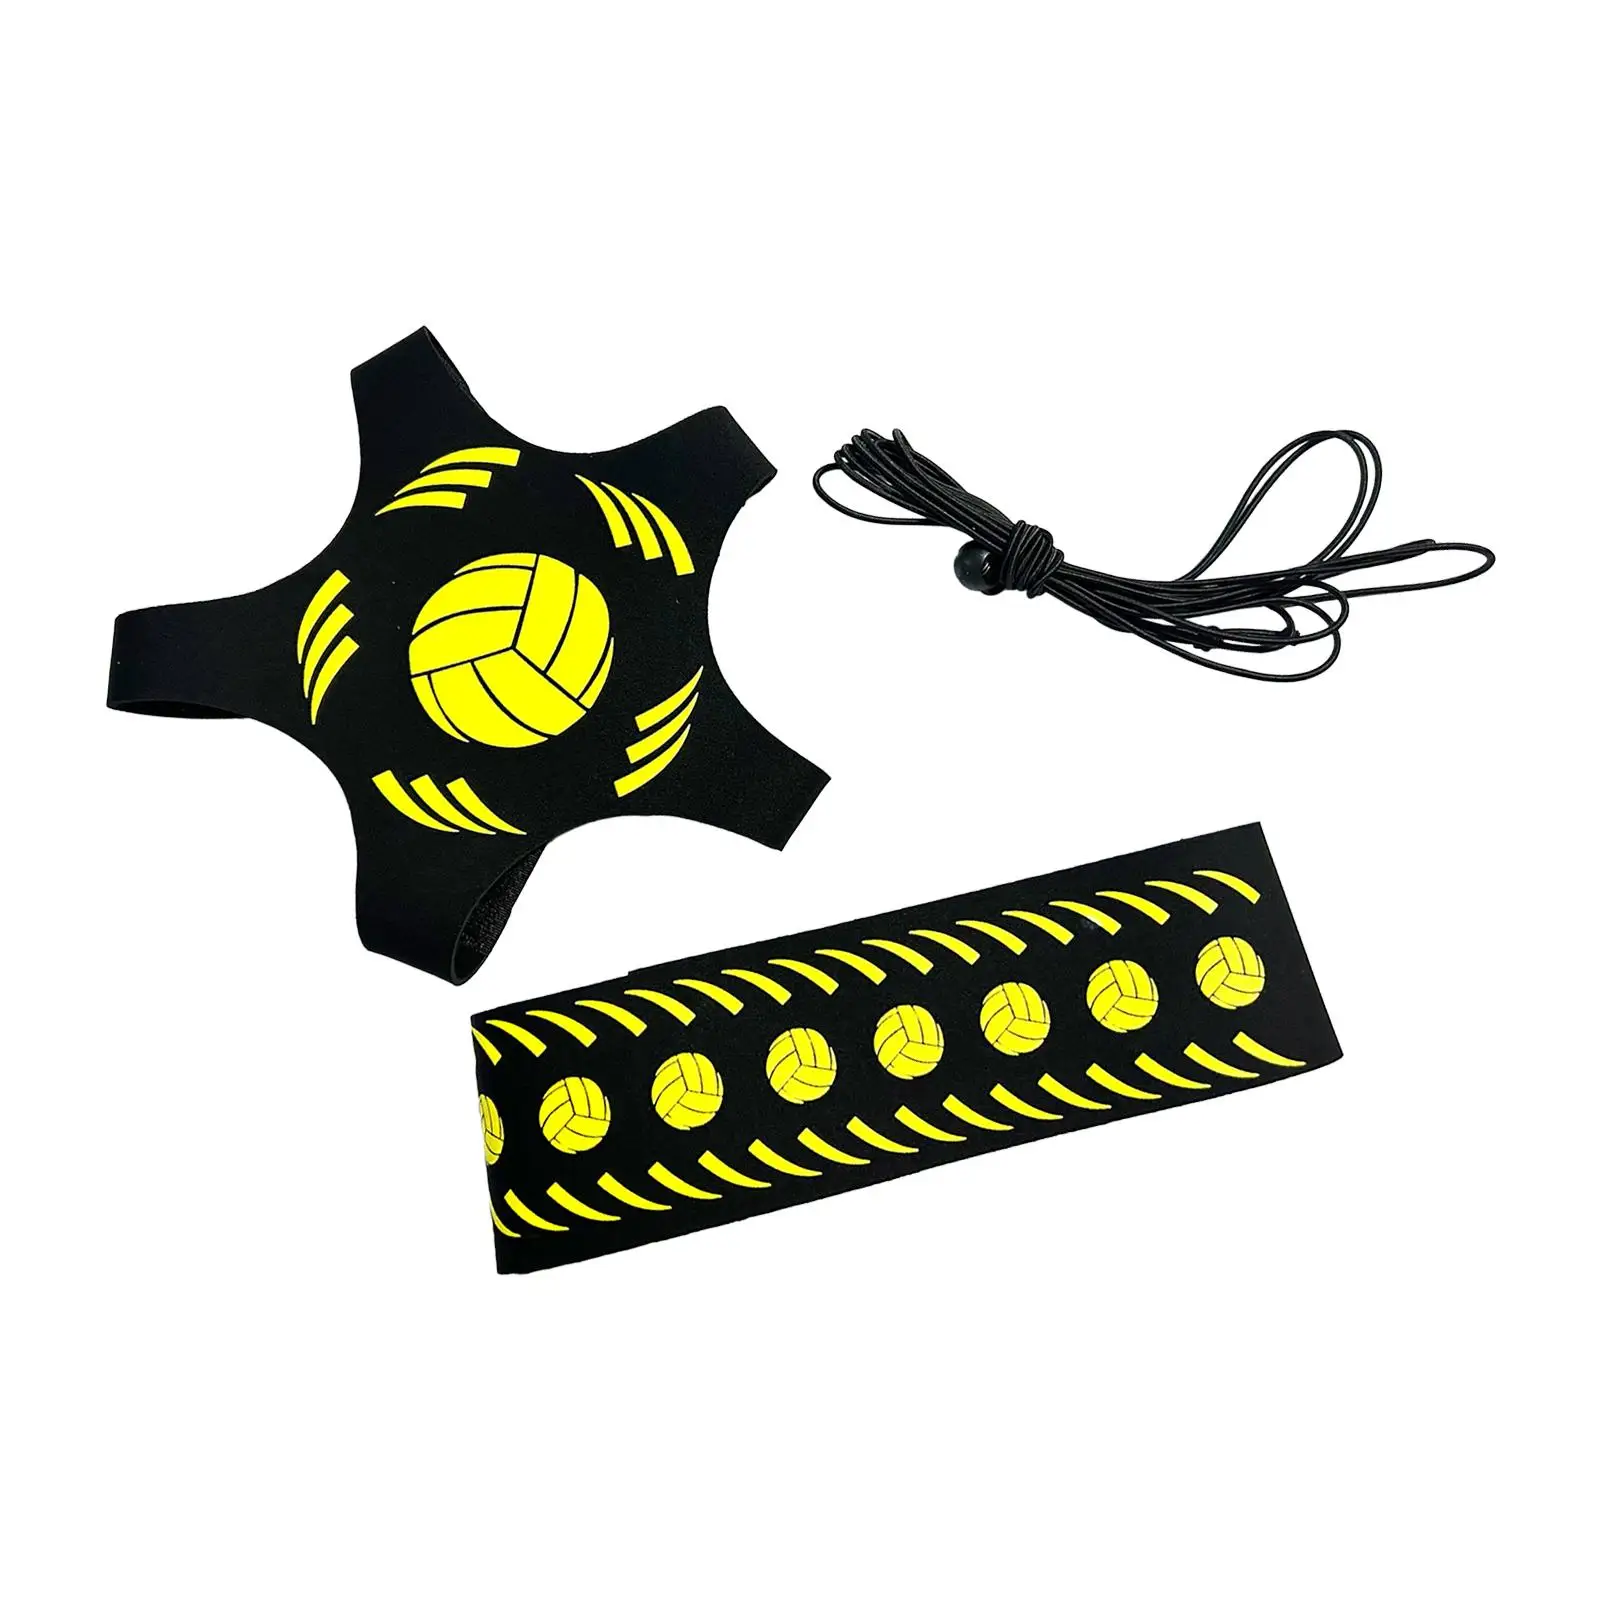 Volleyball Training Equipment - Improve Your Skills with This Adjustable Waist